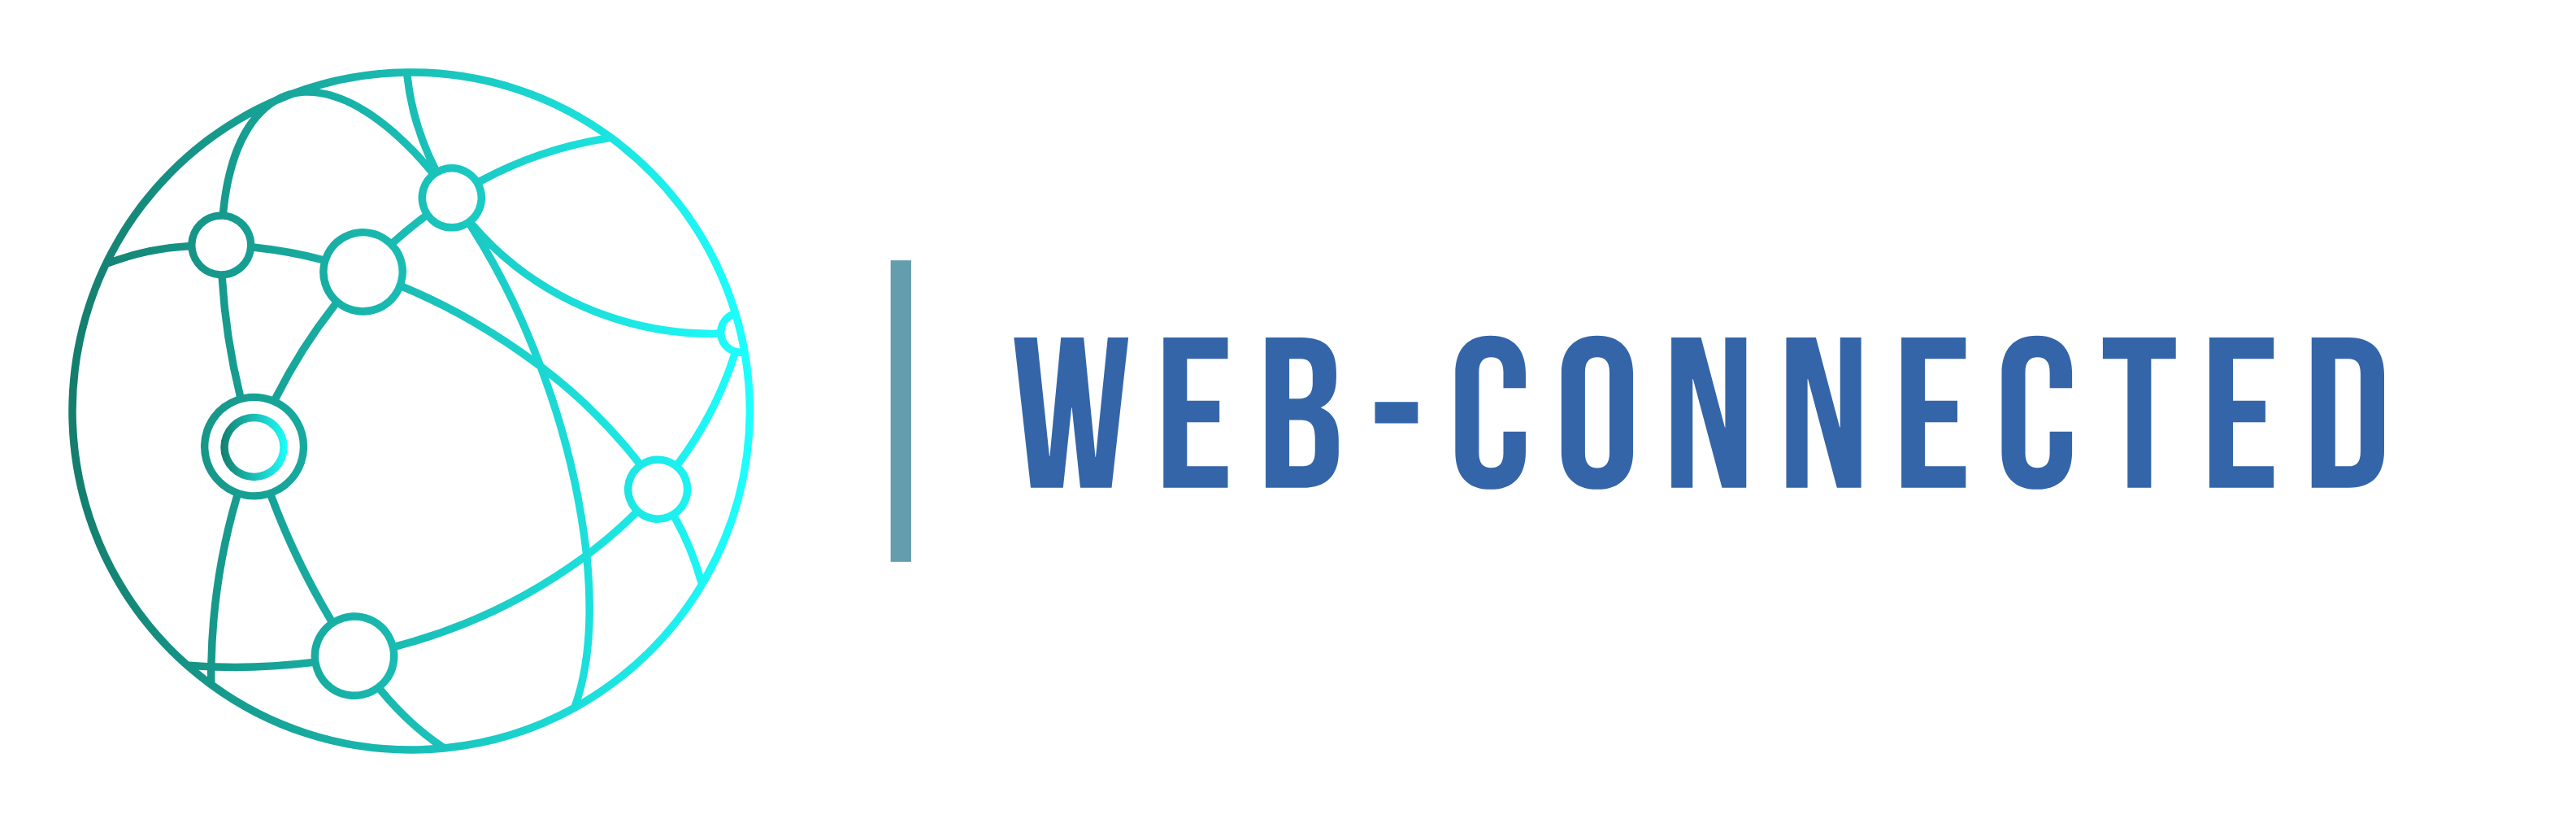 Web-connected